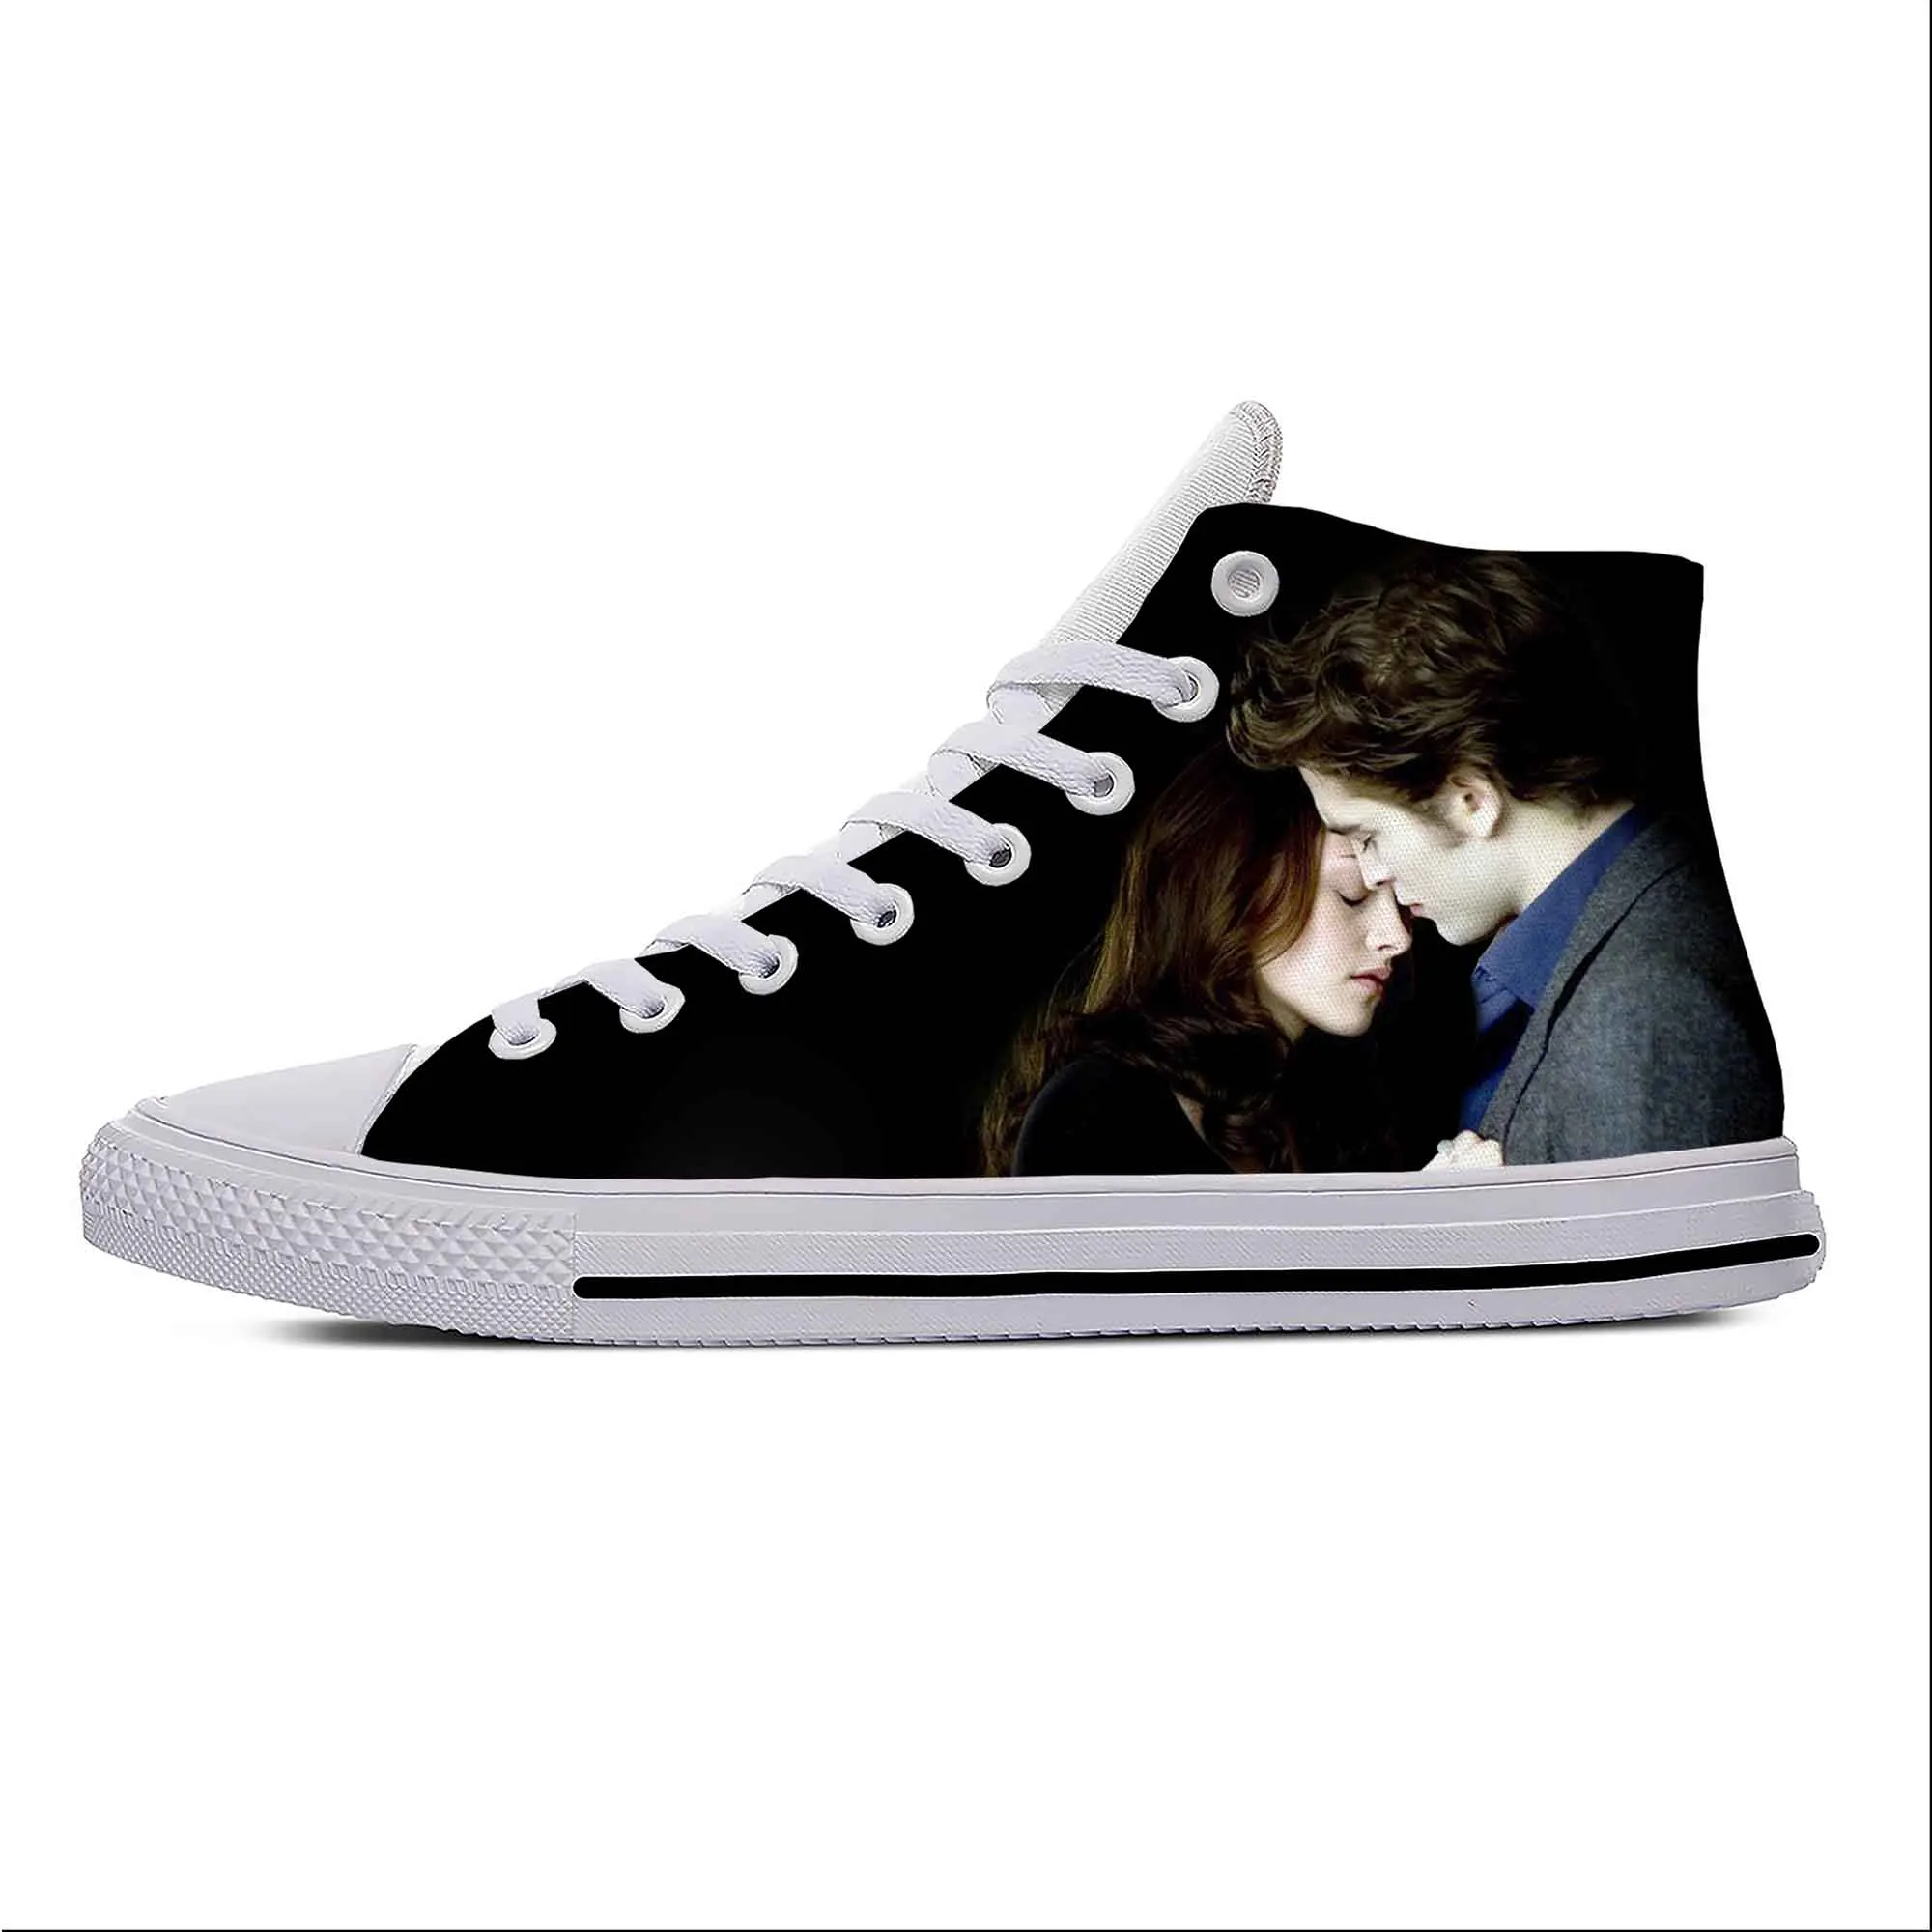 aktivt vand blomsten lastbil Cartoon Bella Edward Twilight Saga Movie Vampire Casual Cloth Shoes High  Top Lightweight Breathable 3d Print Men Women Sneakers - Non-leather Casual  Shoes - AliExpress